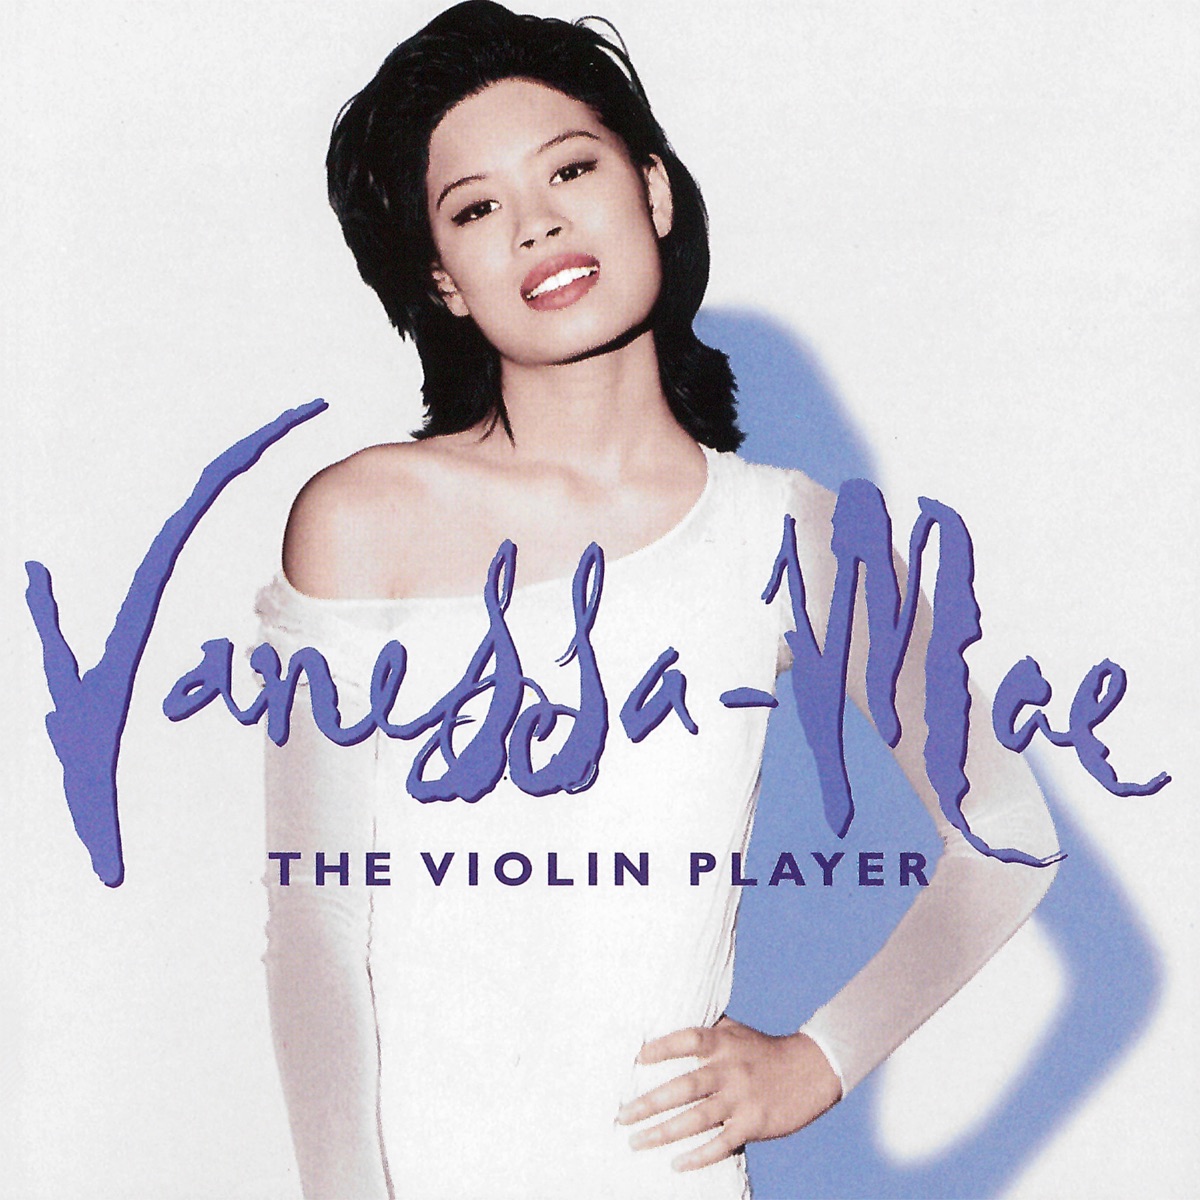 The Violin Player by Vanessa-Mae Apple Music